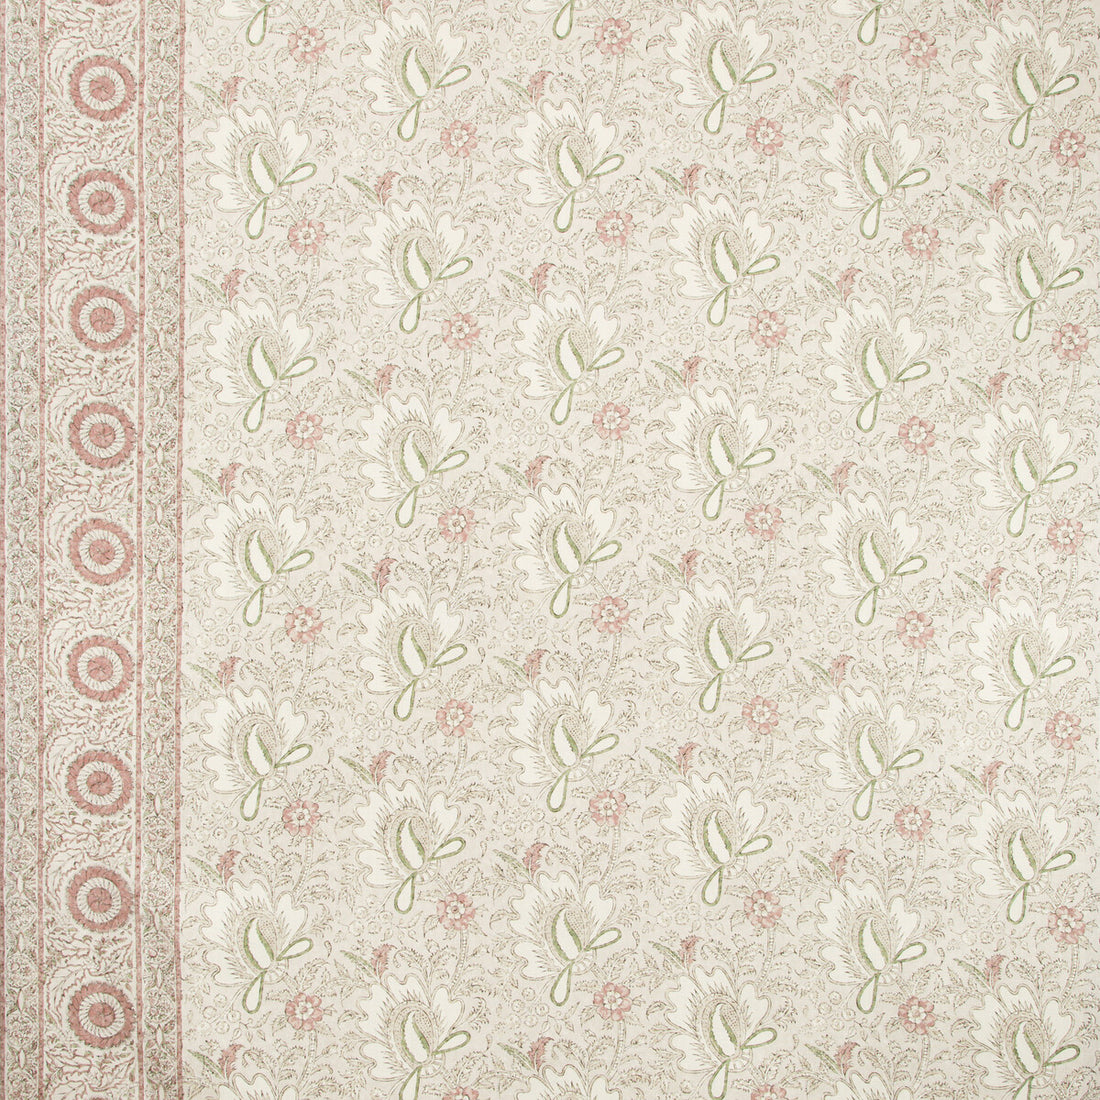 Dove Meadow fabric in radicchio color - pattern 2019150.103.0 - by Lee Jofa in the Carrier And Company collection